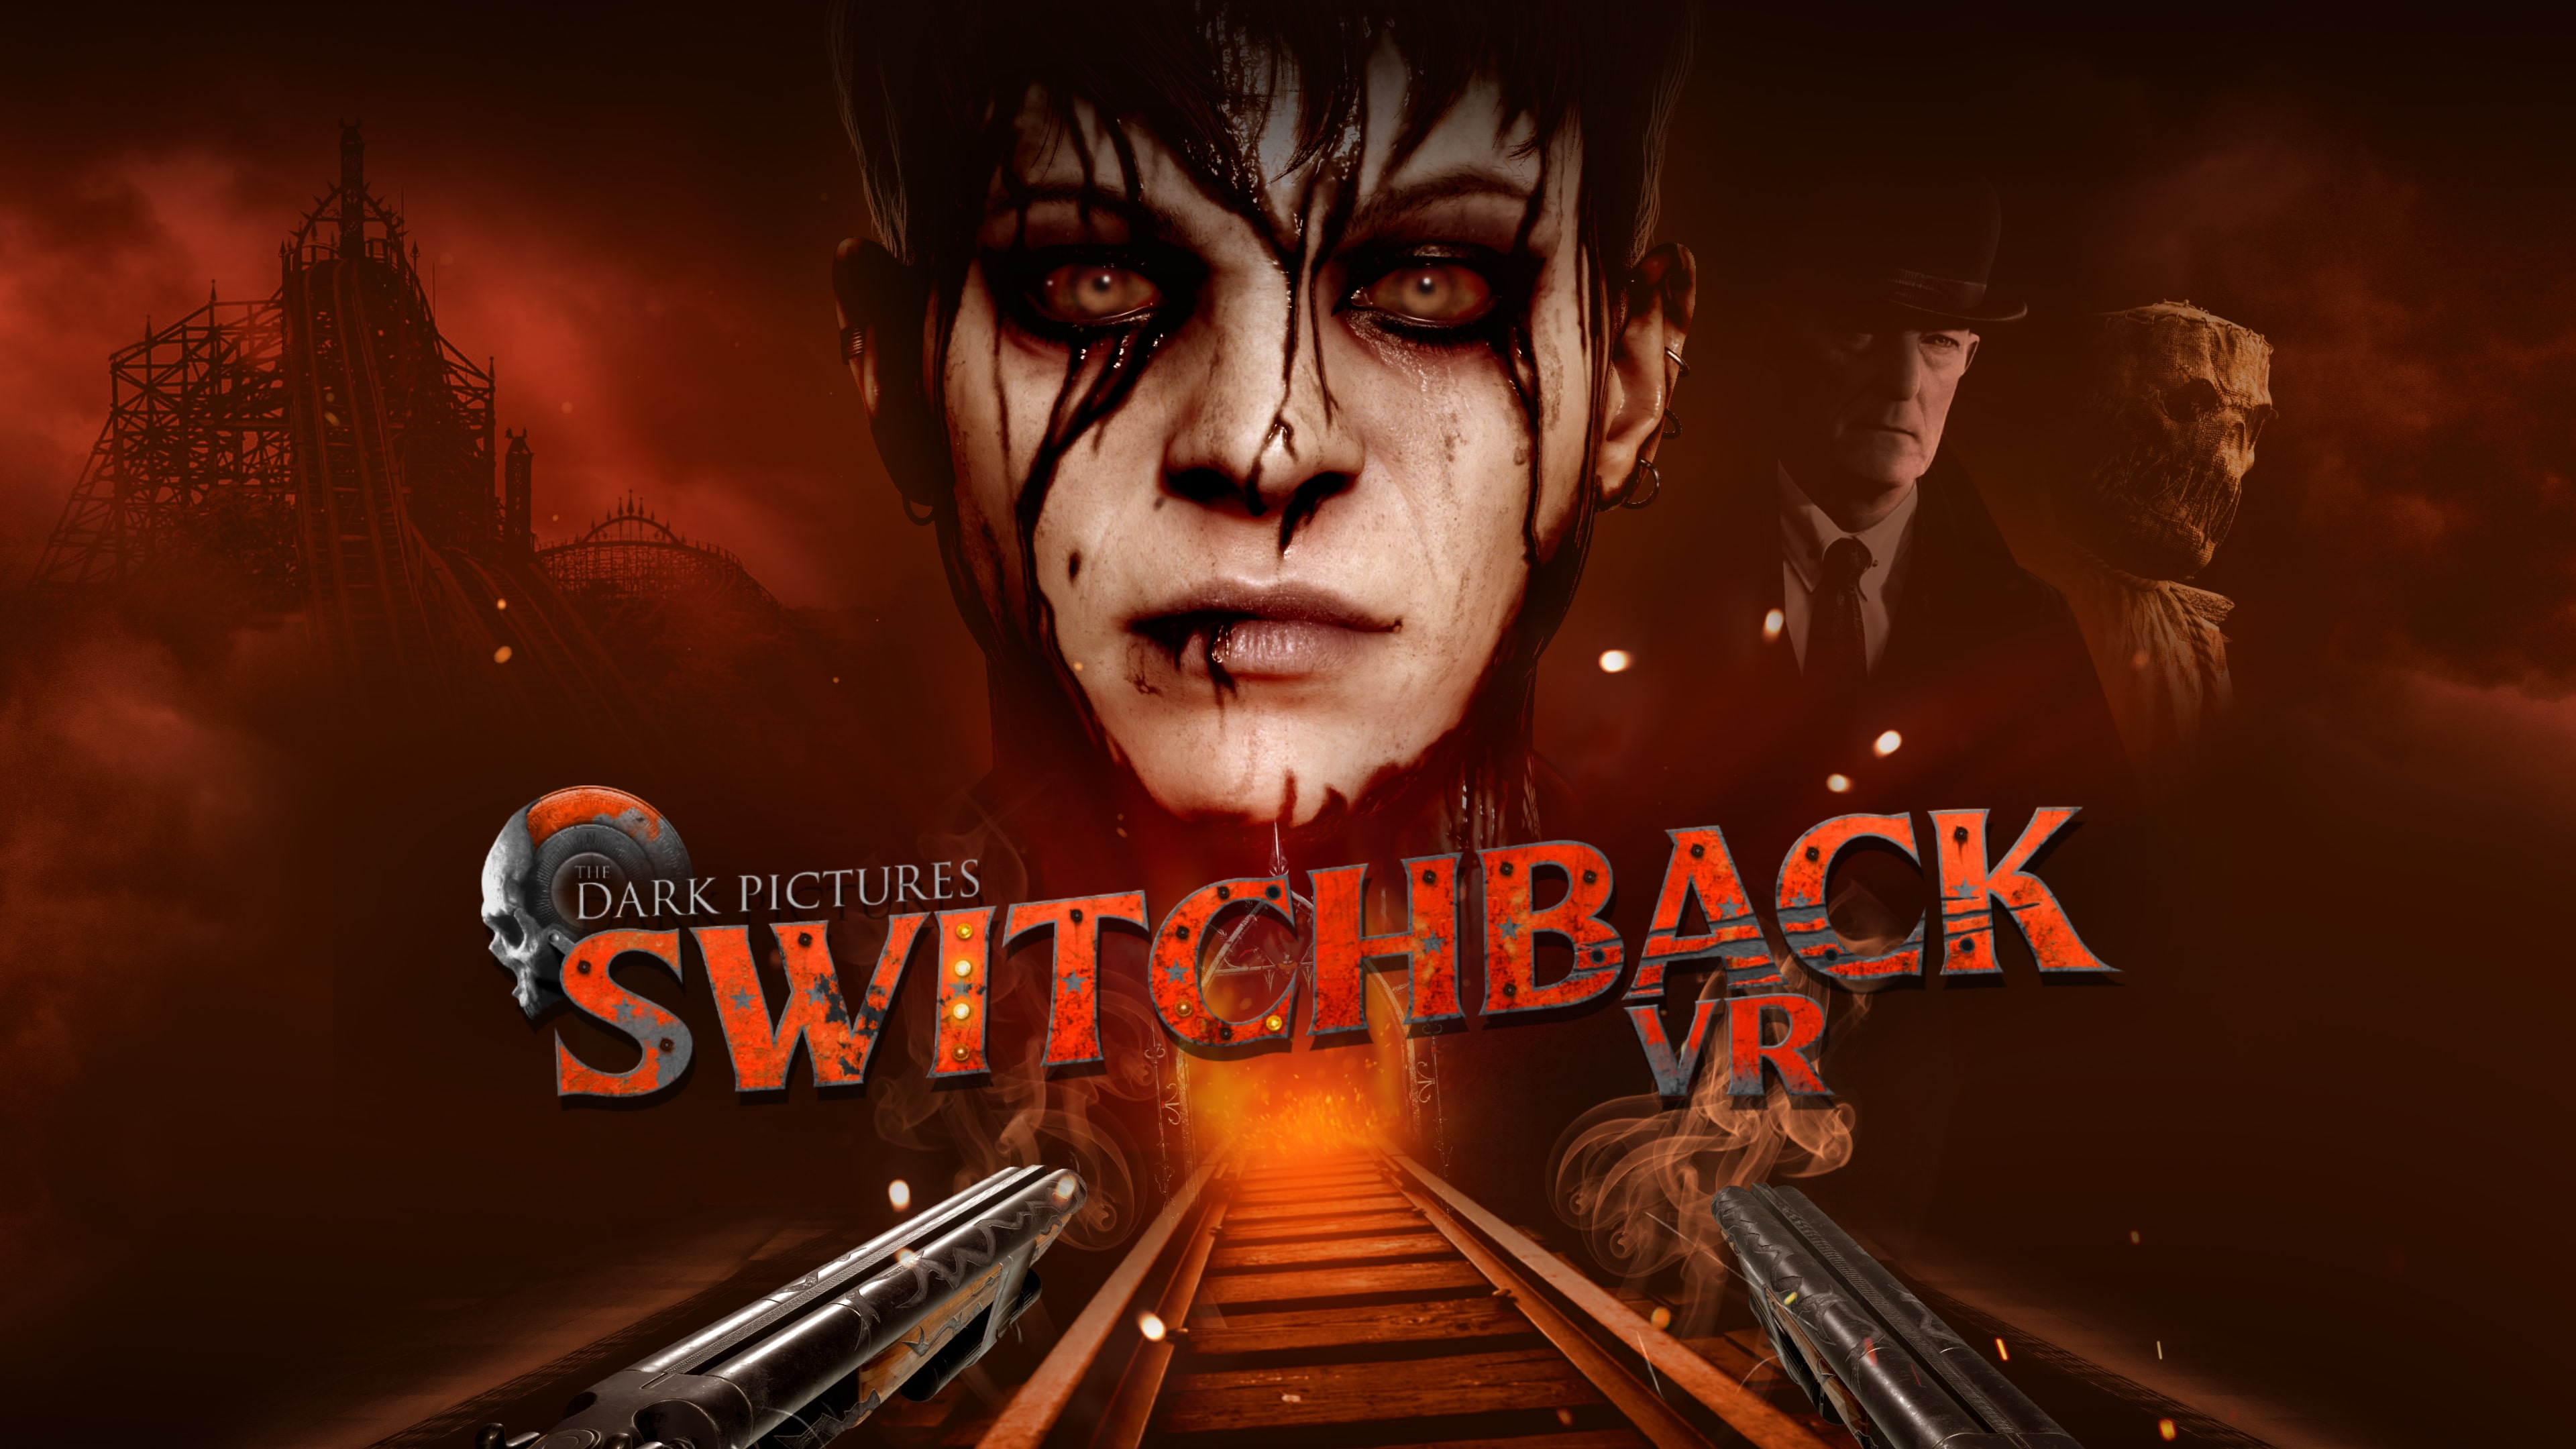 The Dark Pictures: Switchback VR (한국어판)